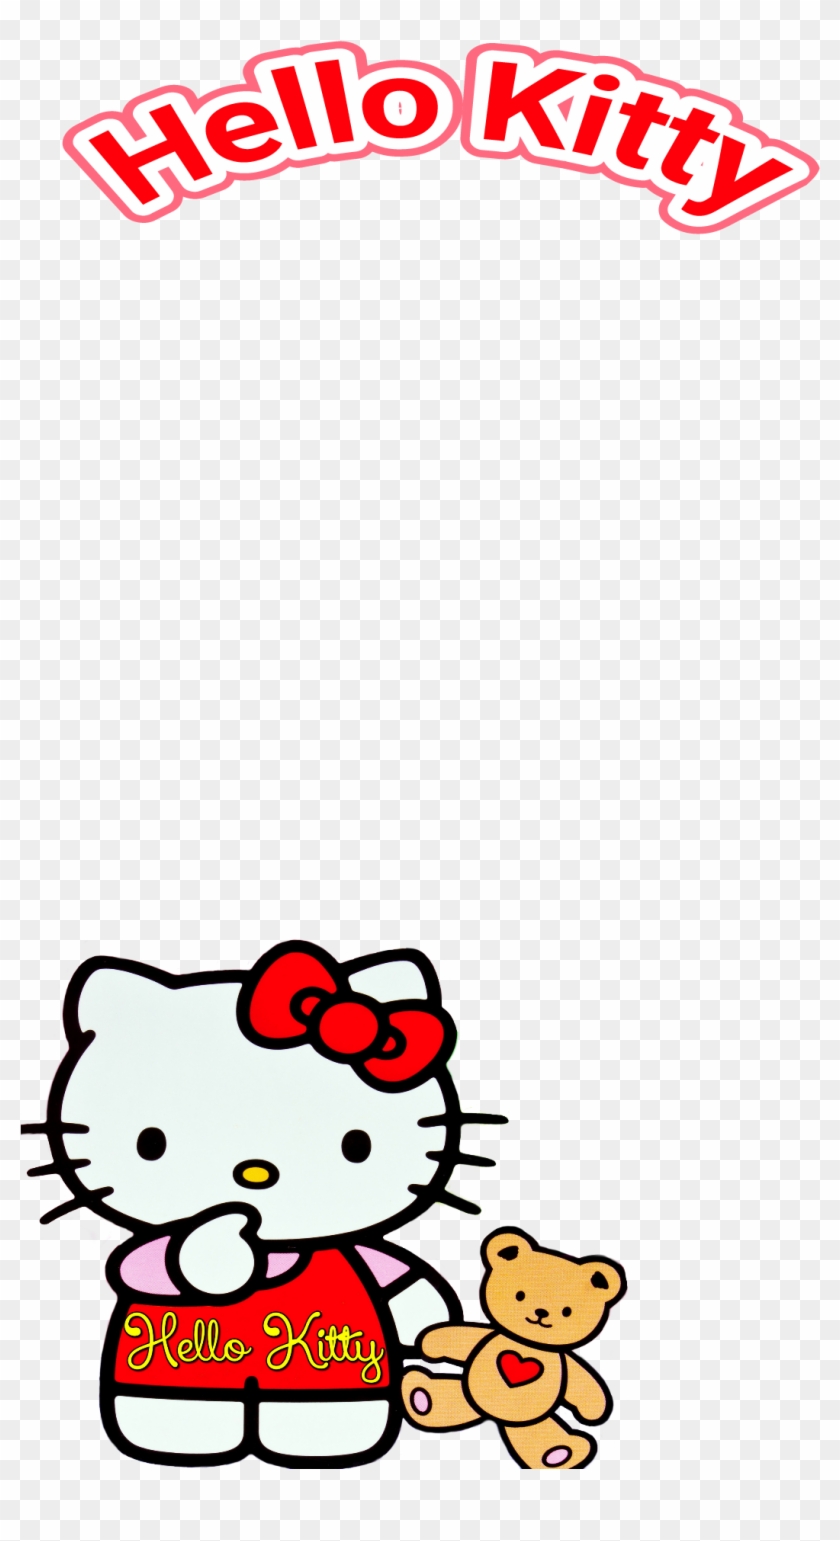 Snapchat Filters Clipart Cow - Hello Kitty Sticker Whatsapp - Png Download #969142